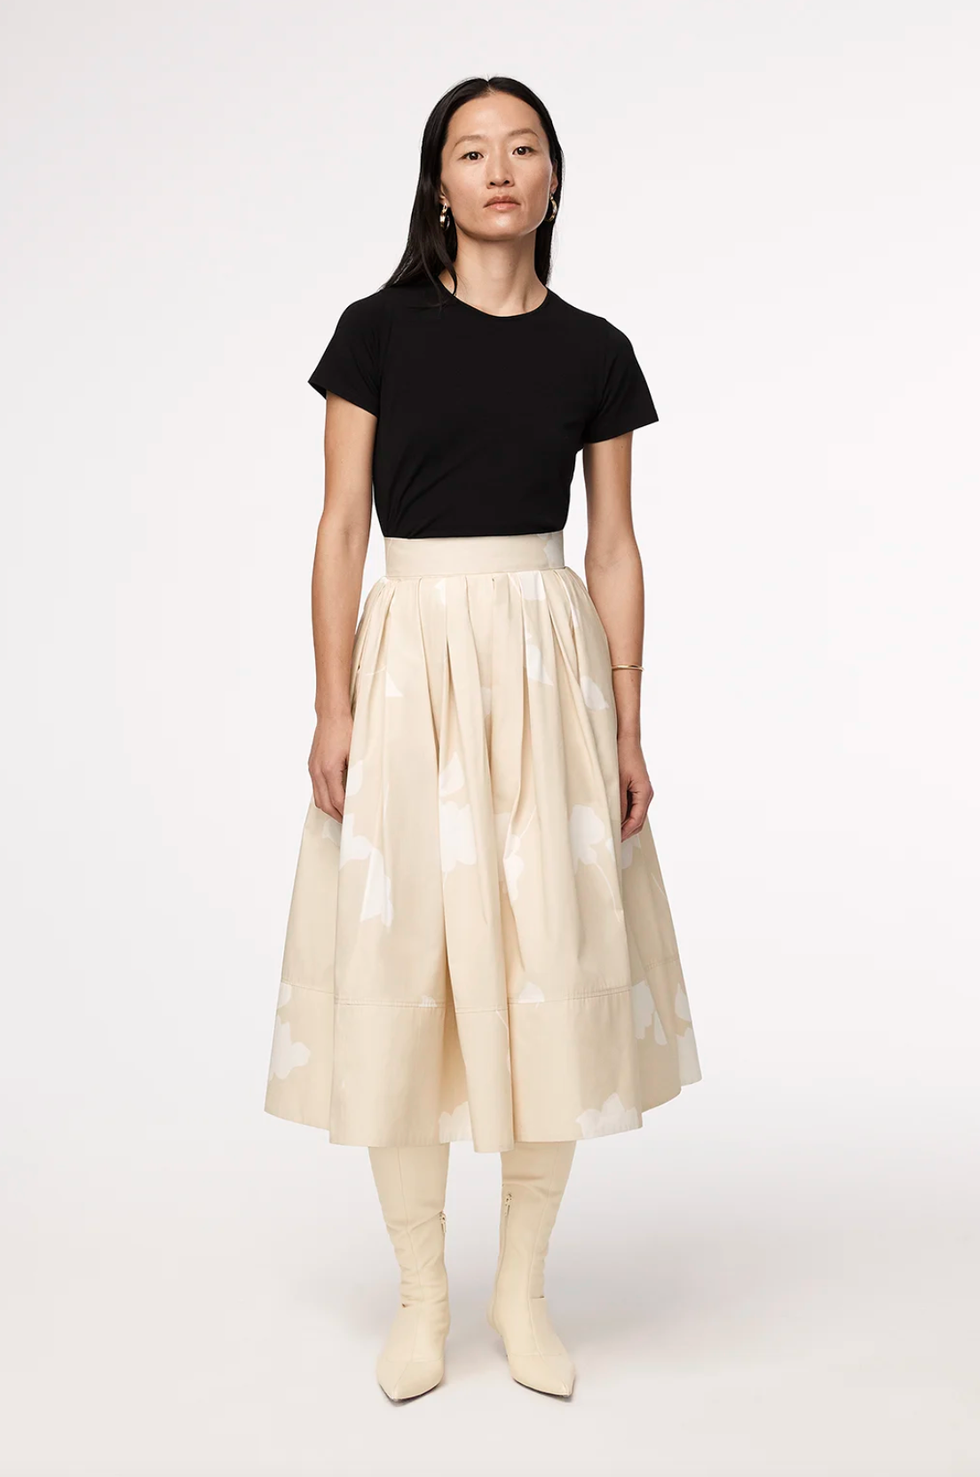 Circle Skirts 2023: Circle Skirts Are Completely Trend-Proof